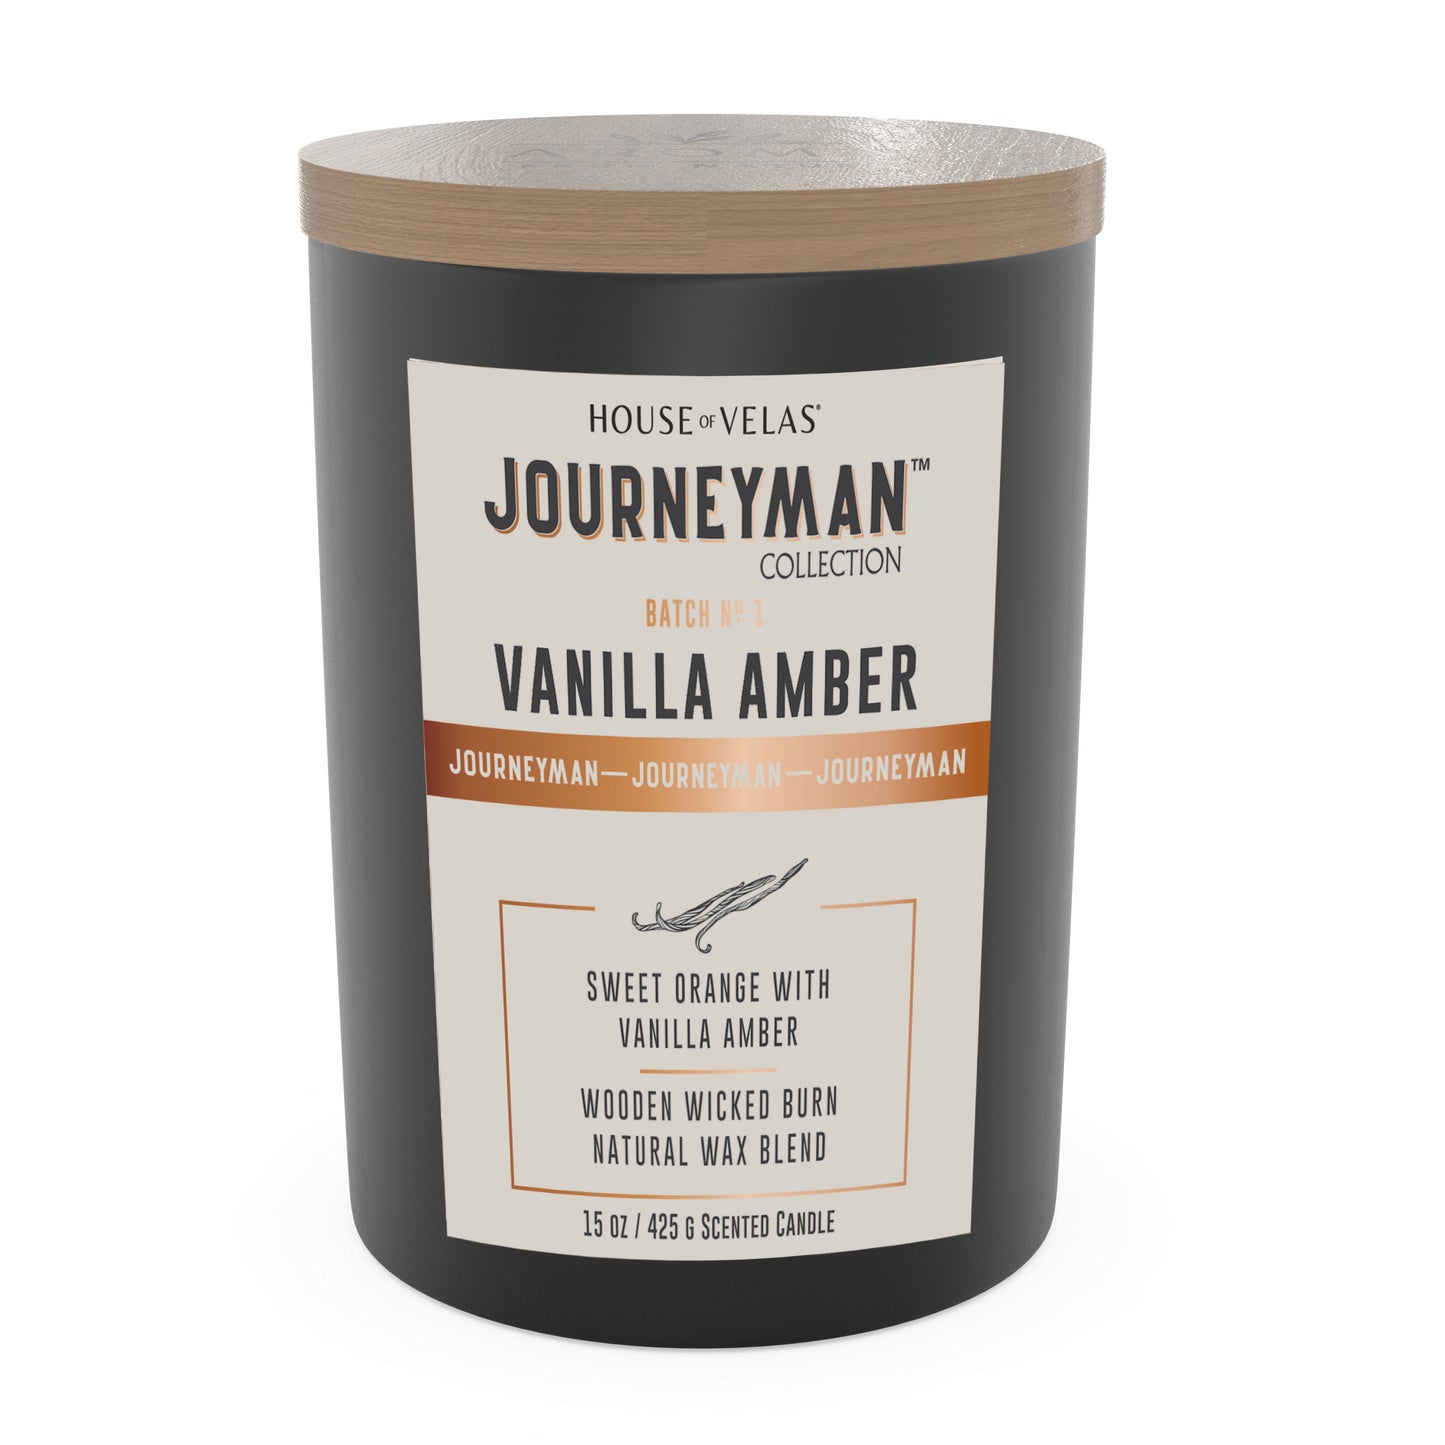 Journeyman by House of Velas - Vanilla Amber Scented Candle, 15oz